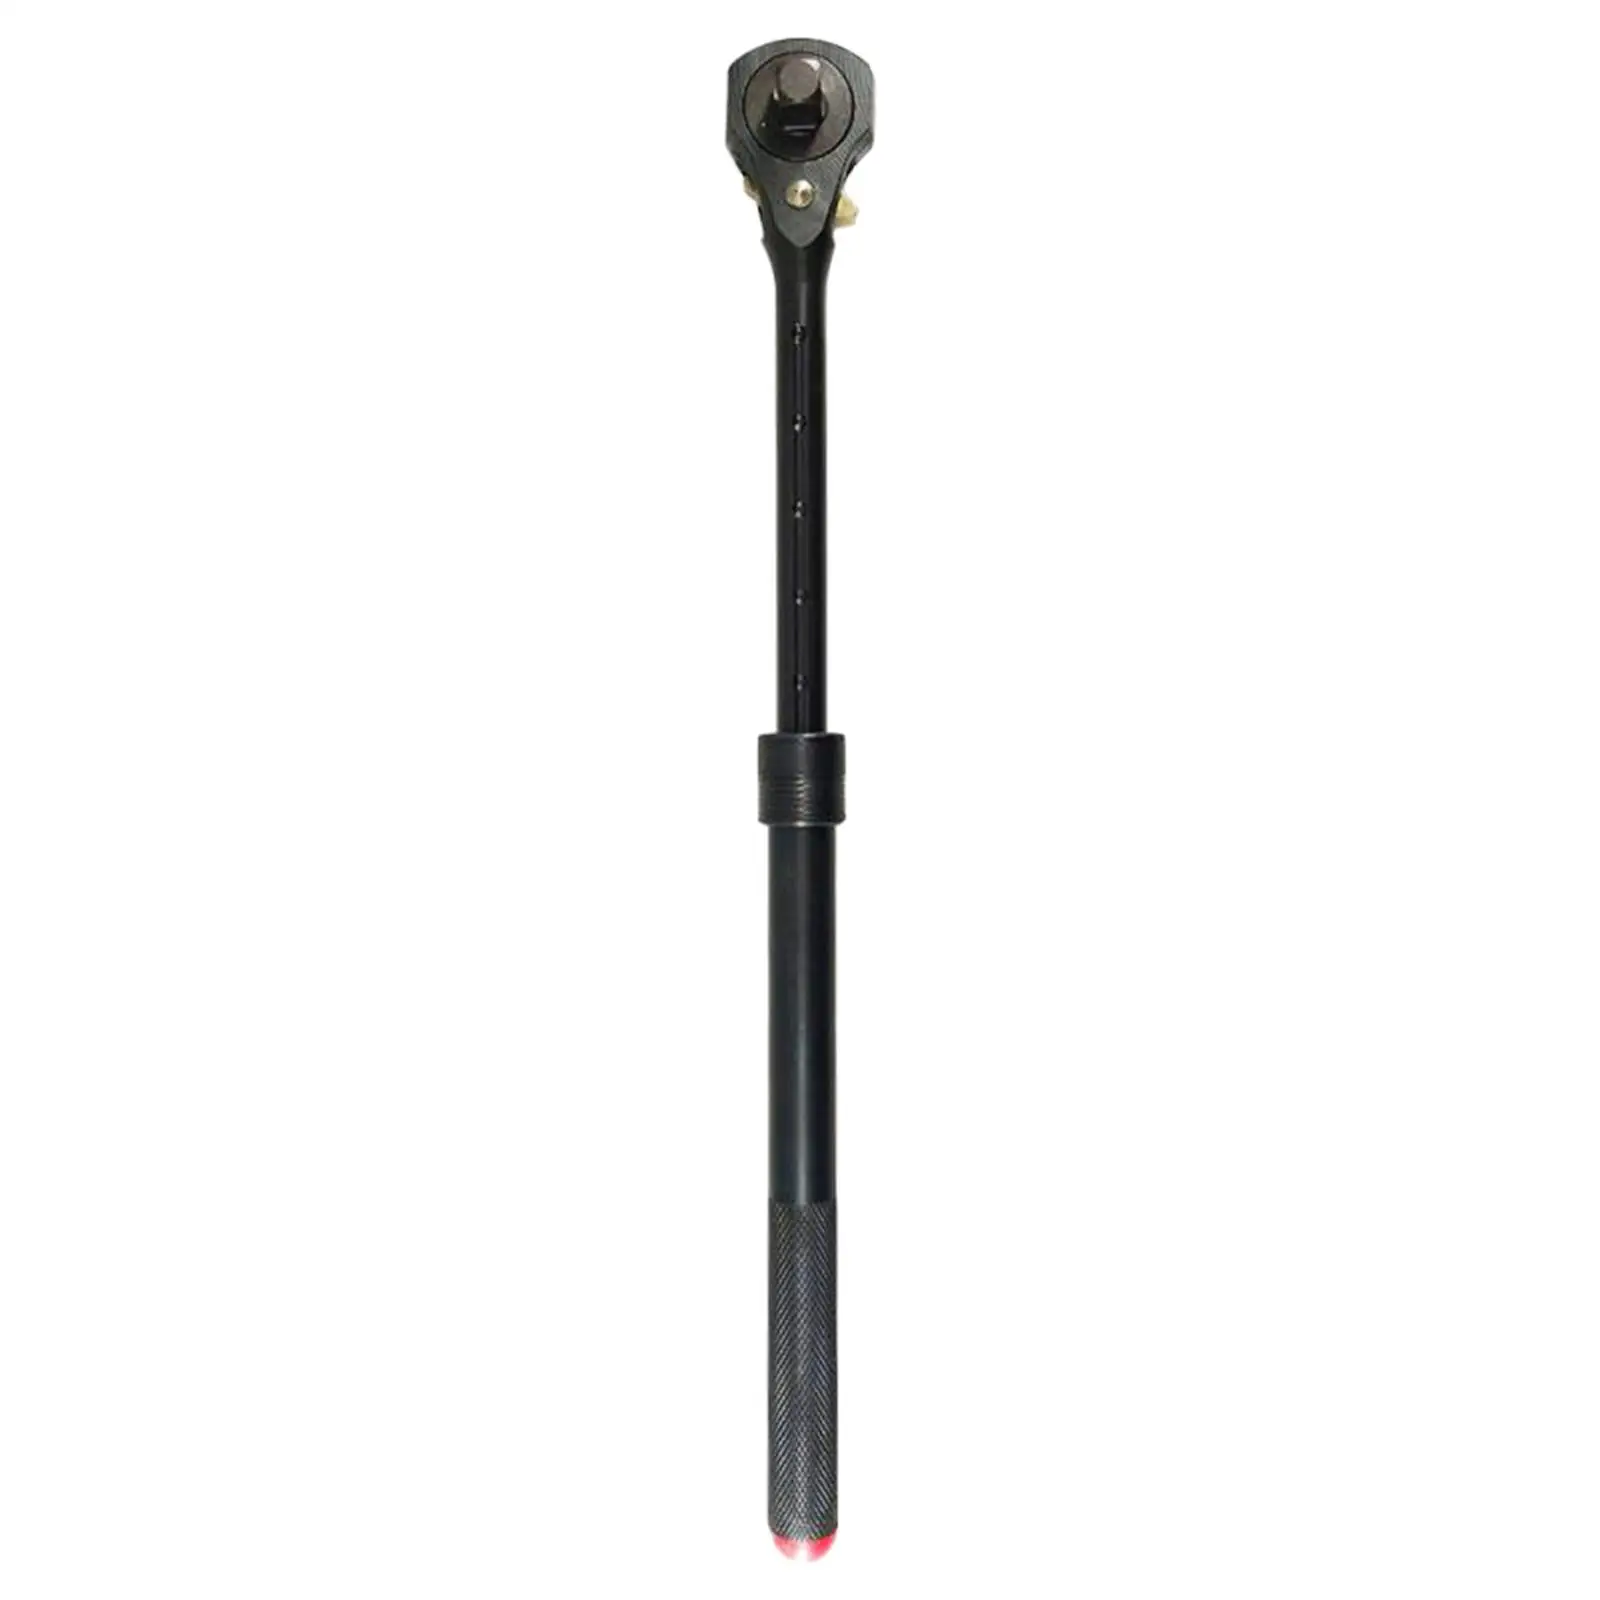 Ratchet Spud Wrench Long Handle Spud Wrench for Auto Parts Construction Works